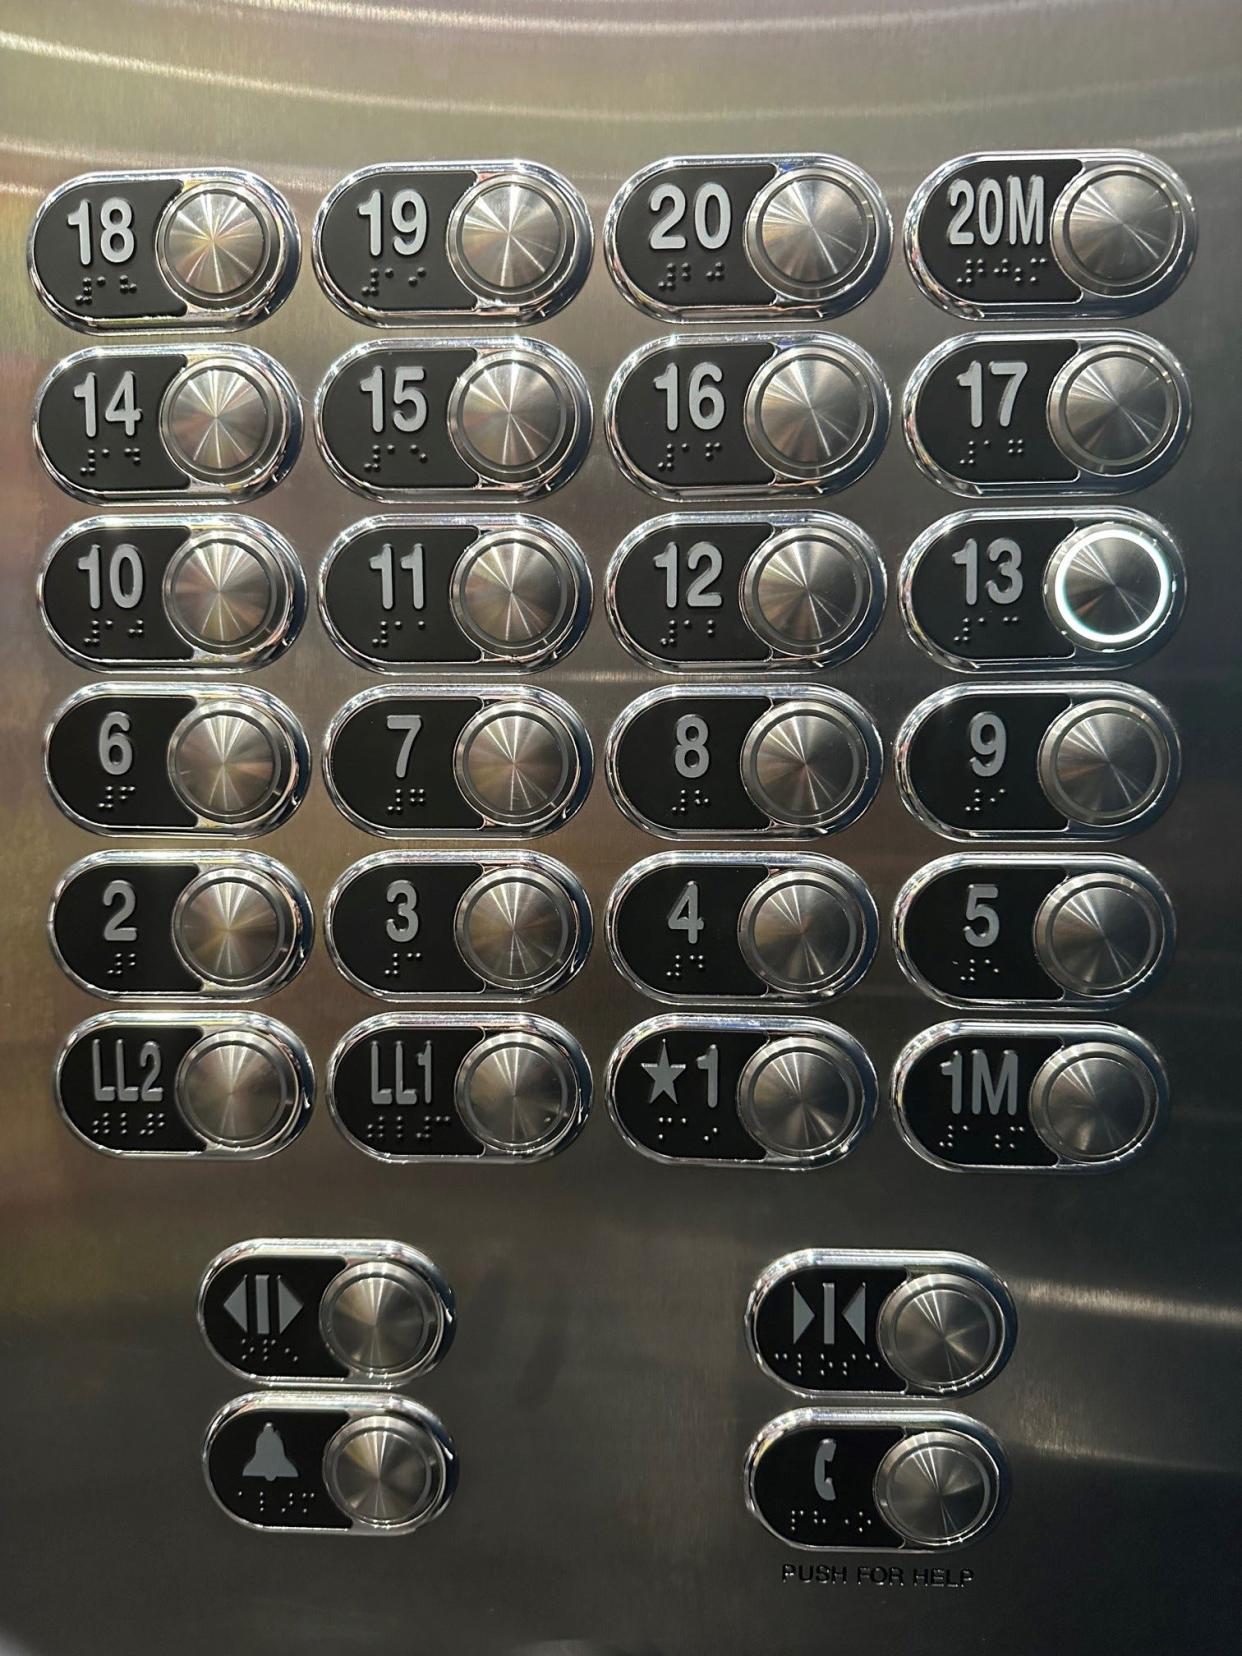 The elevator button panel in the new Albion apartment building in Nashville, Tenn., shows the building does have a 13th floor. In fact, one unit that has been rented is #1313, which is on the 13th floor. Apparently that person doesn't have triskaidekaphobia, or a fear of the number 13.